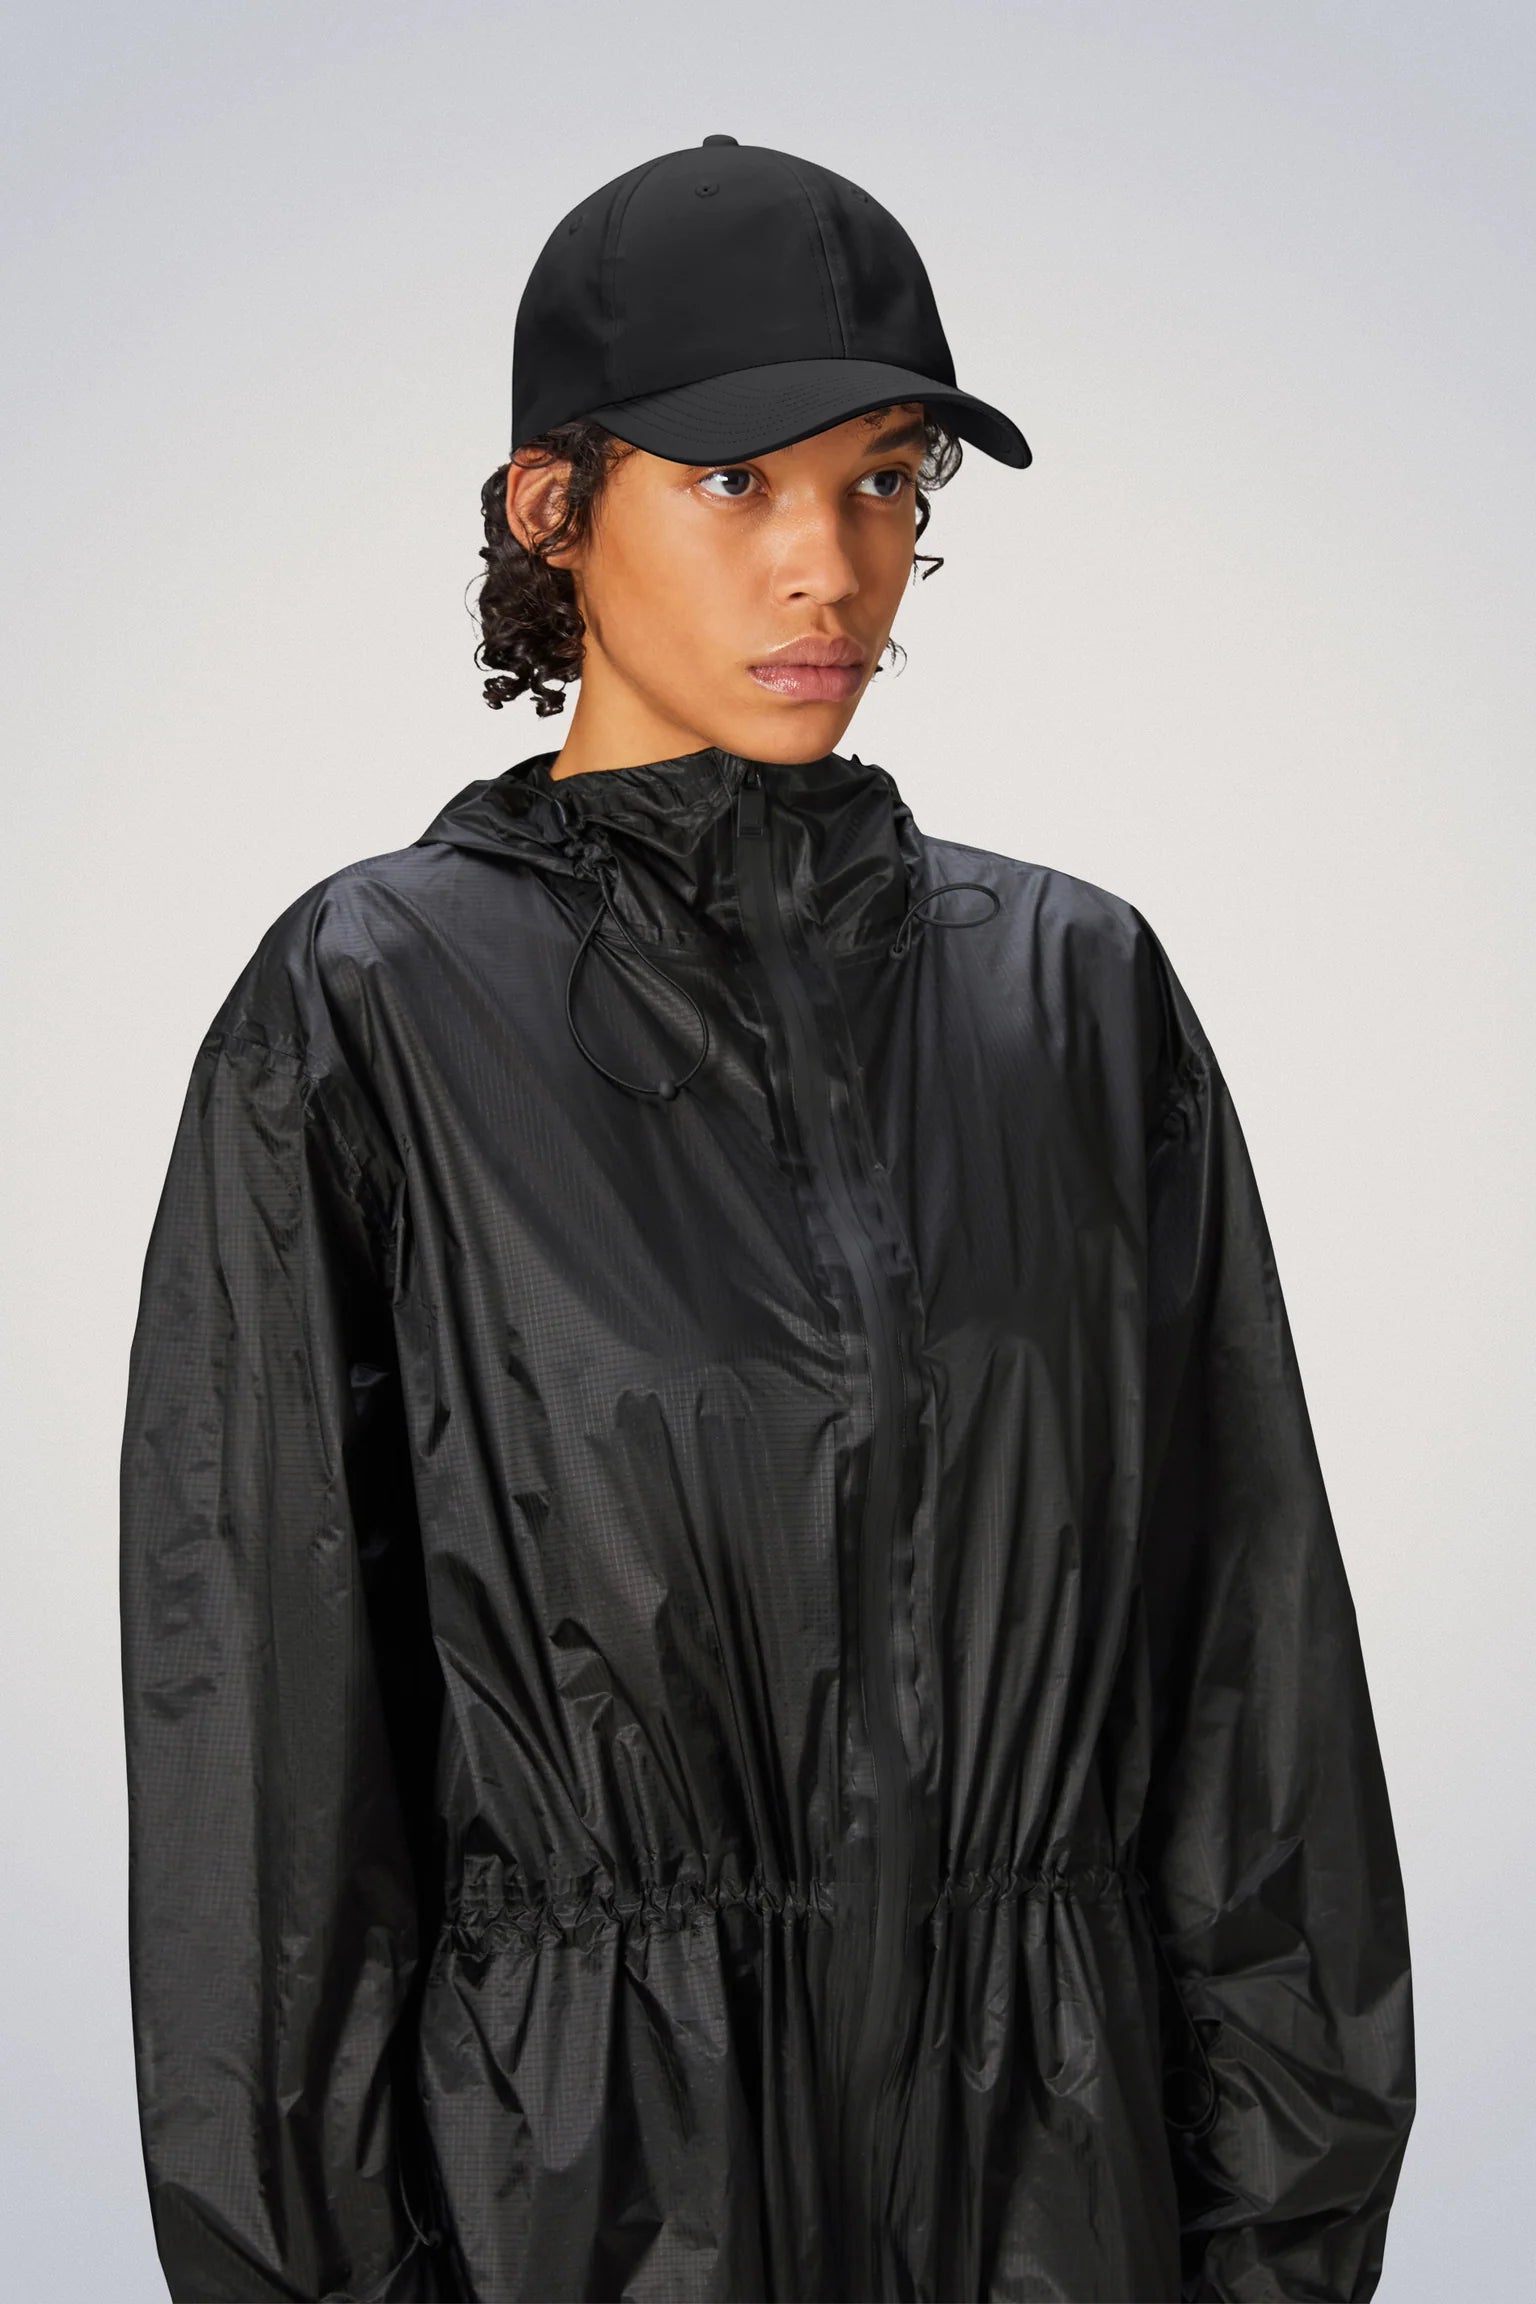 A woman wearing a black raincoat and hat with a Rains Waterproof Cap.